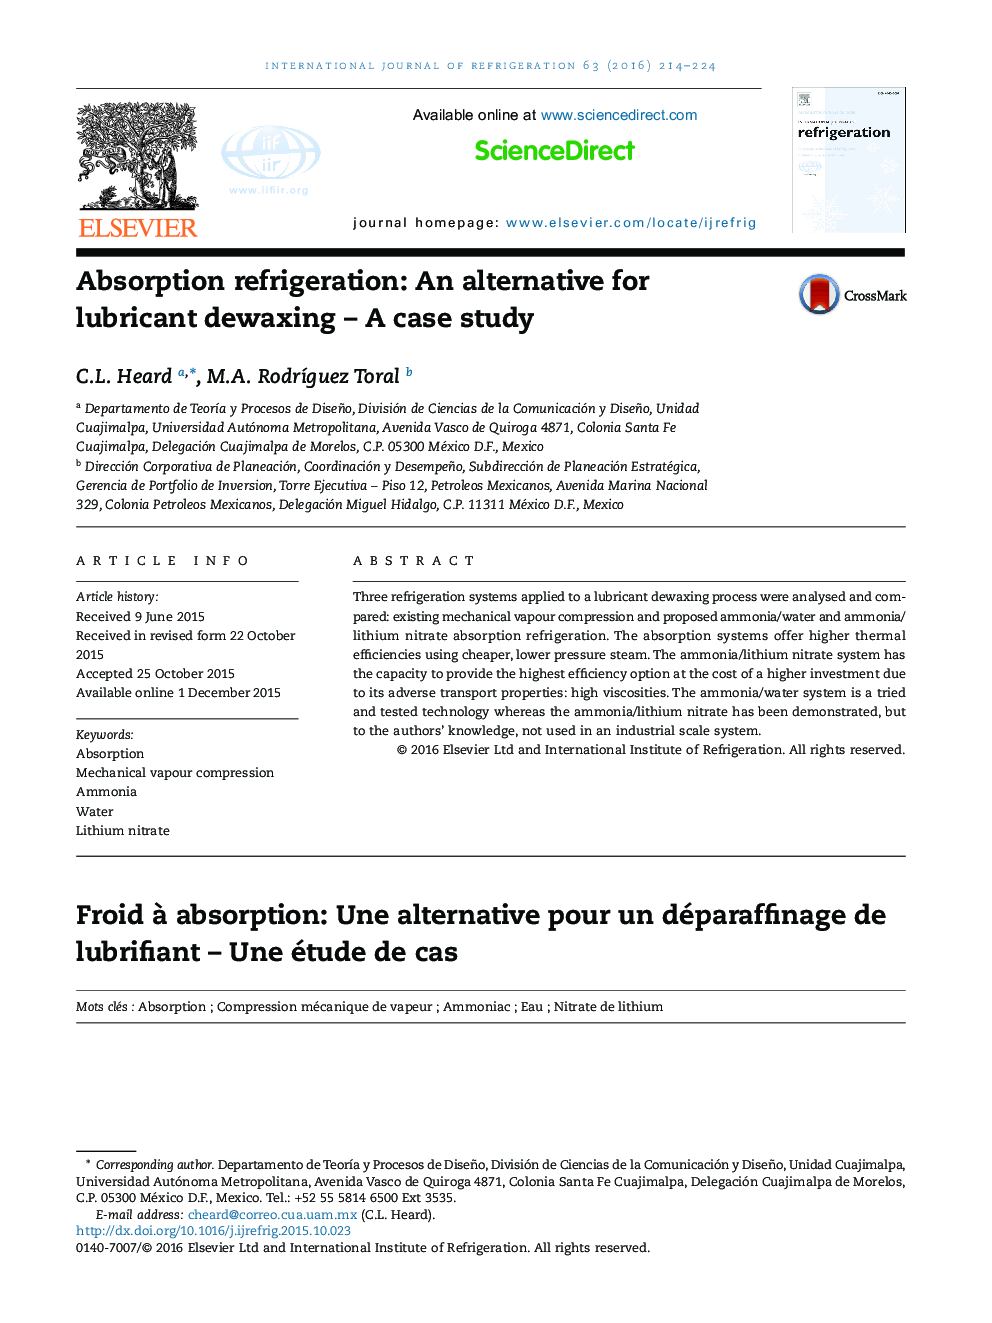 Absorption refrigeration: An alternative for lubricant dewaxing – A case study